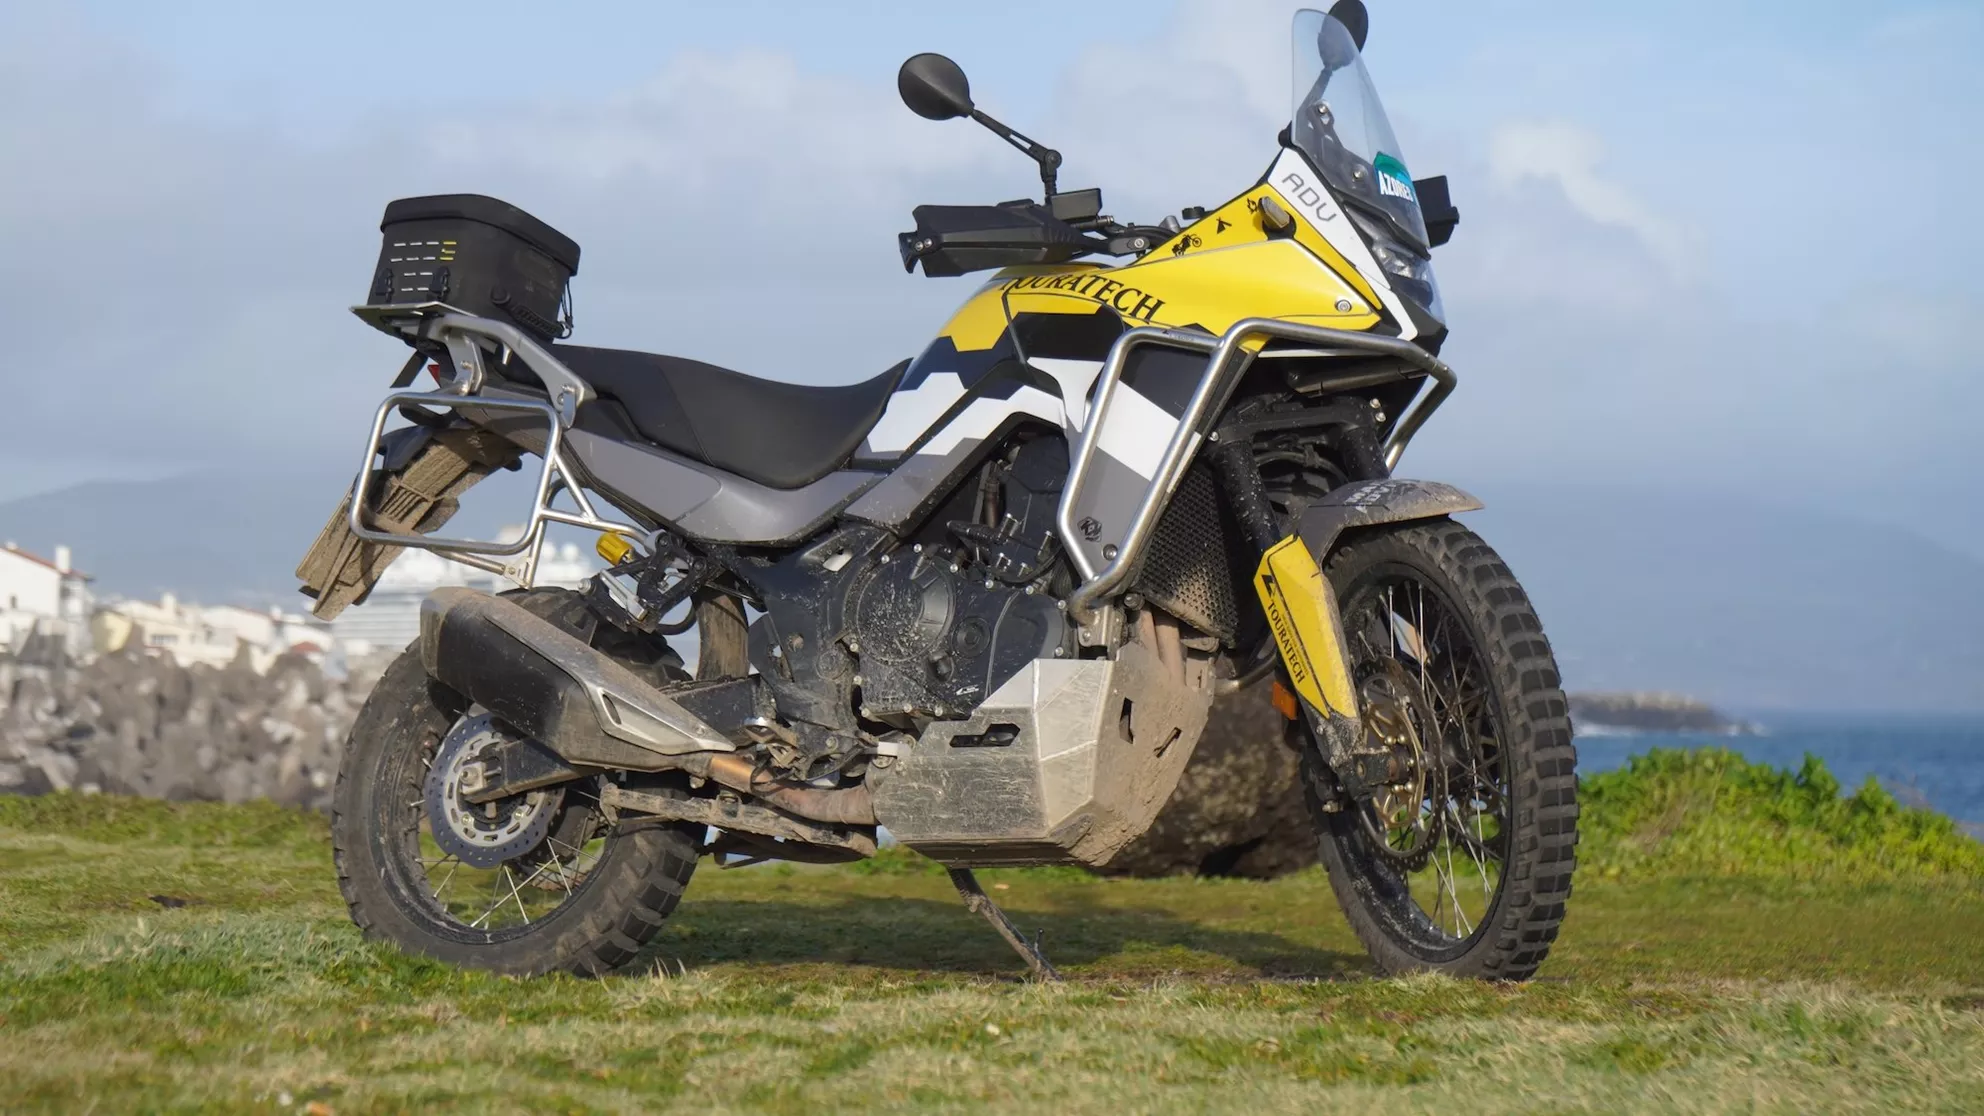 Honda Transalp 750 in Touratech look with Touratech suspension